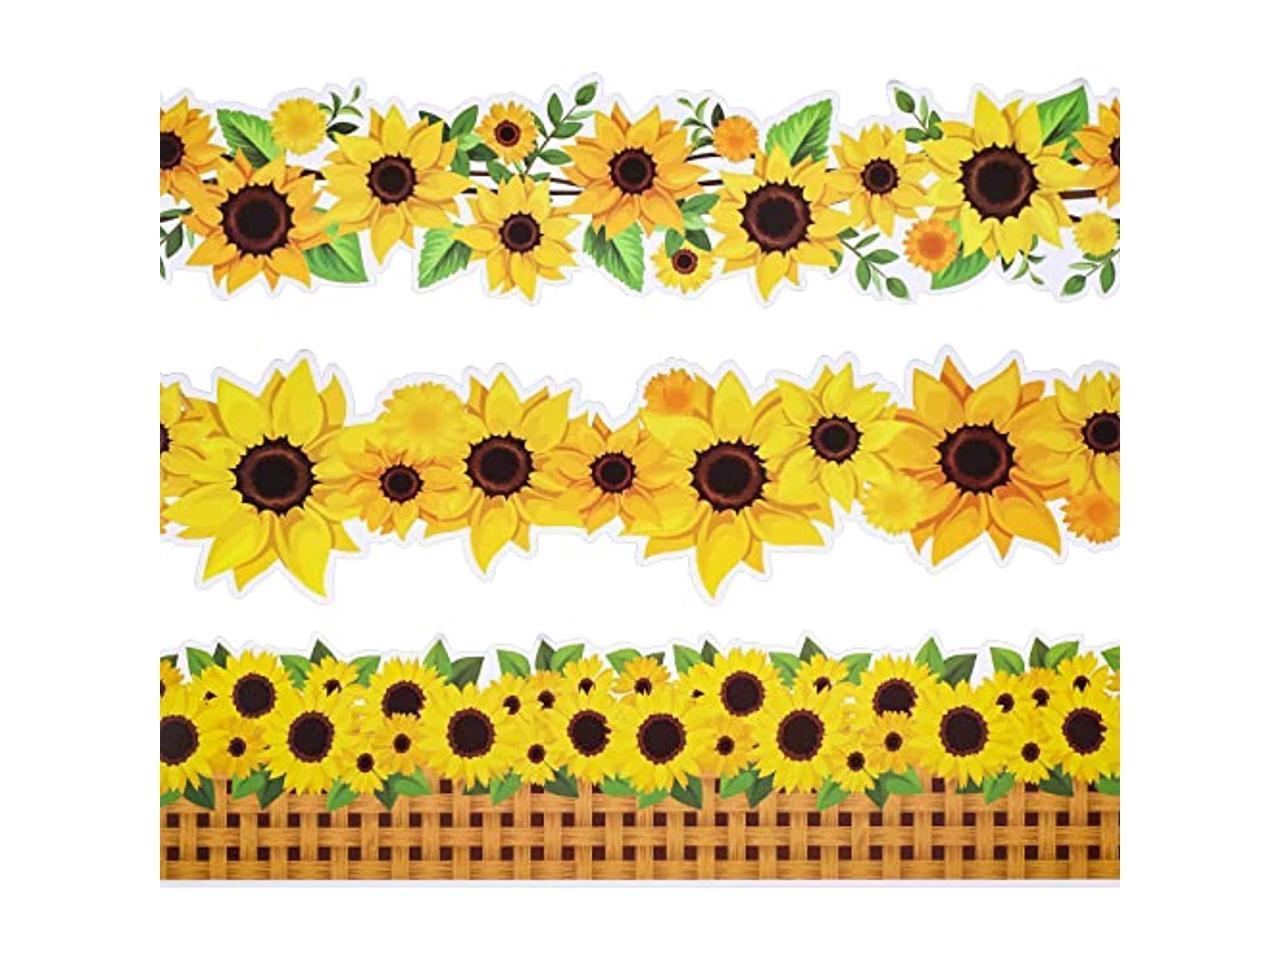 Sunflower Border Fall Bulletin Board Classroom Bulletin Border Wall Decor Sign Sunflower Garland Die Cut Border Classroom Decor Border with Leaves for Baby Shower Party Decor 39 Ft 